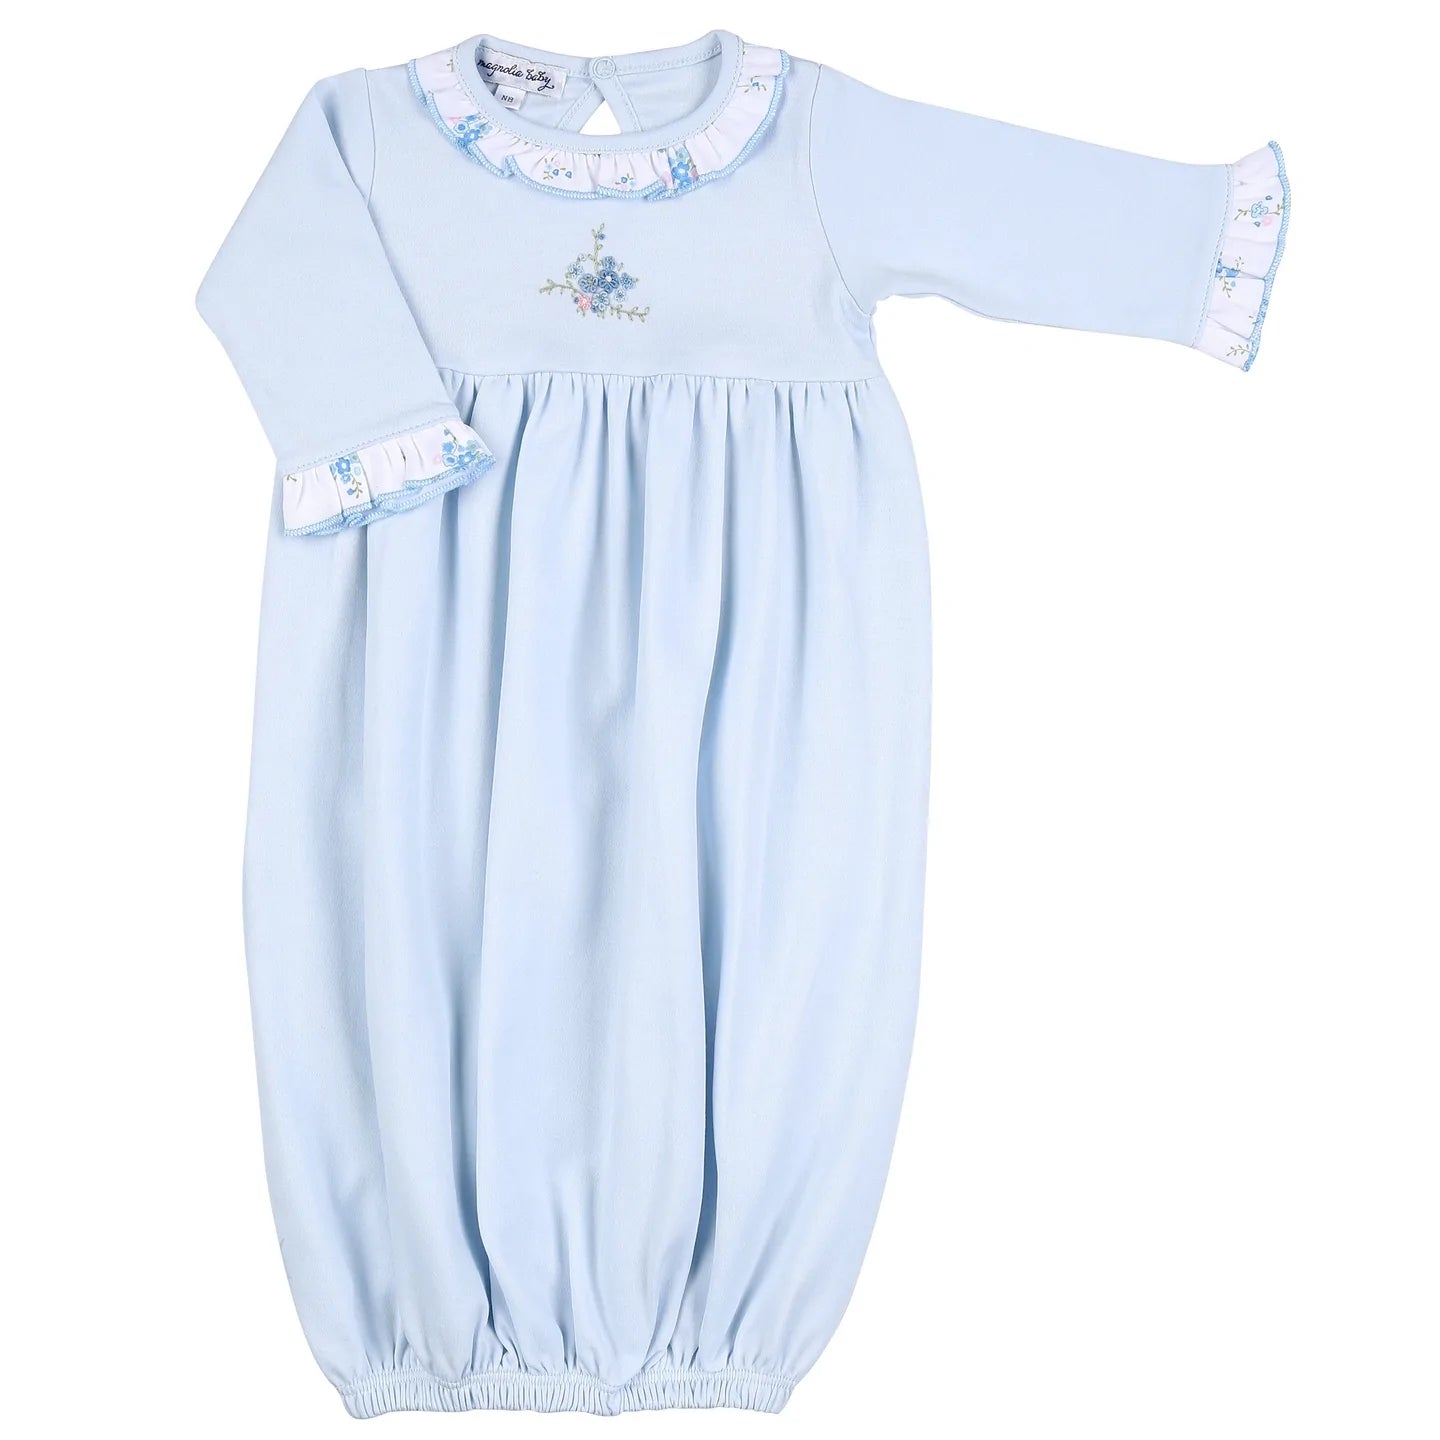 Samantha's Classics Embroidered Ruffle Gown  - Doodlebug's Children's Boutique